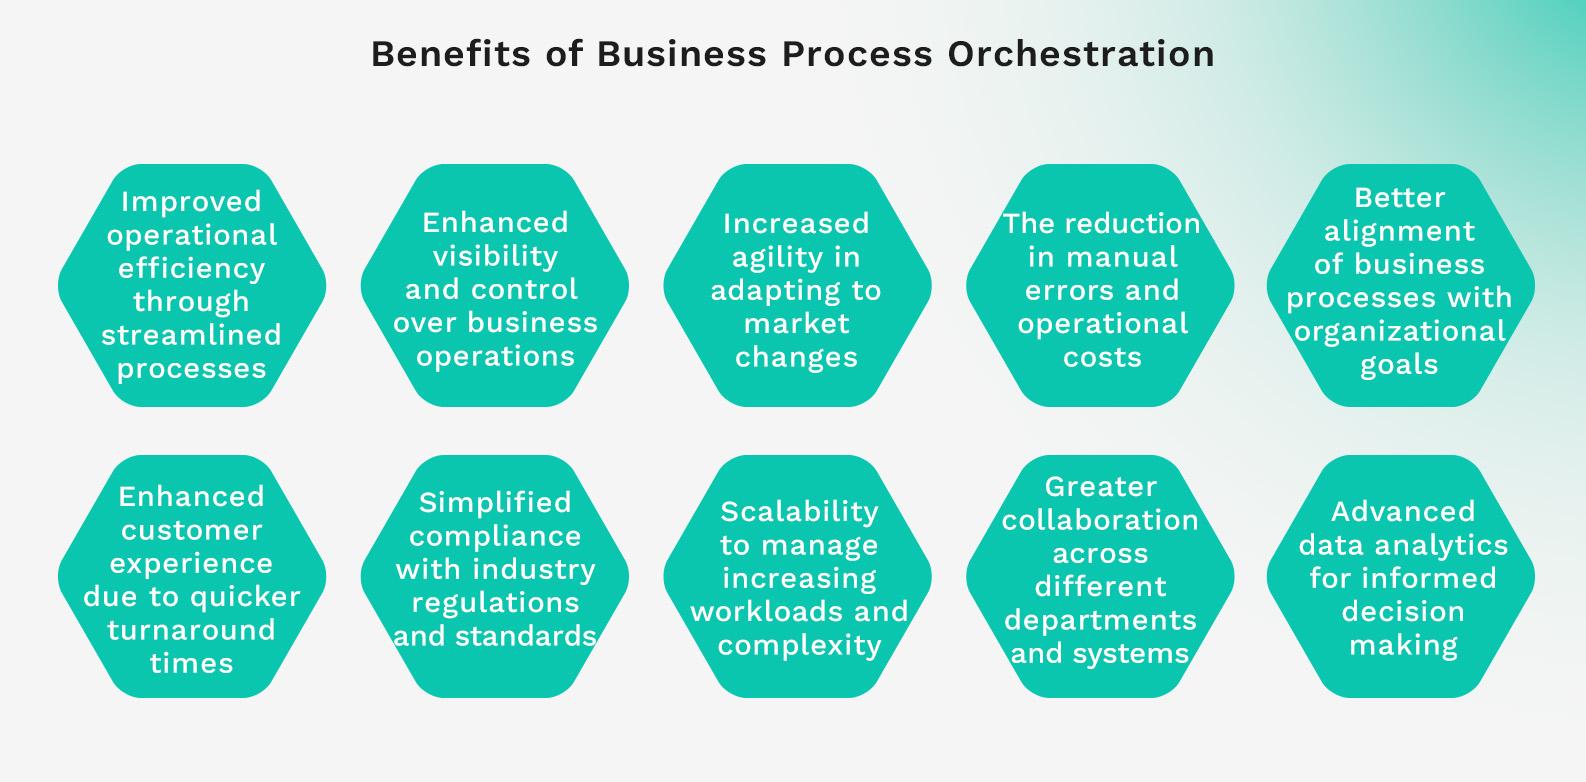 Benefits of Business Process Orchestration